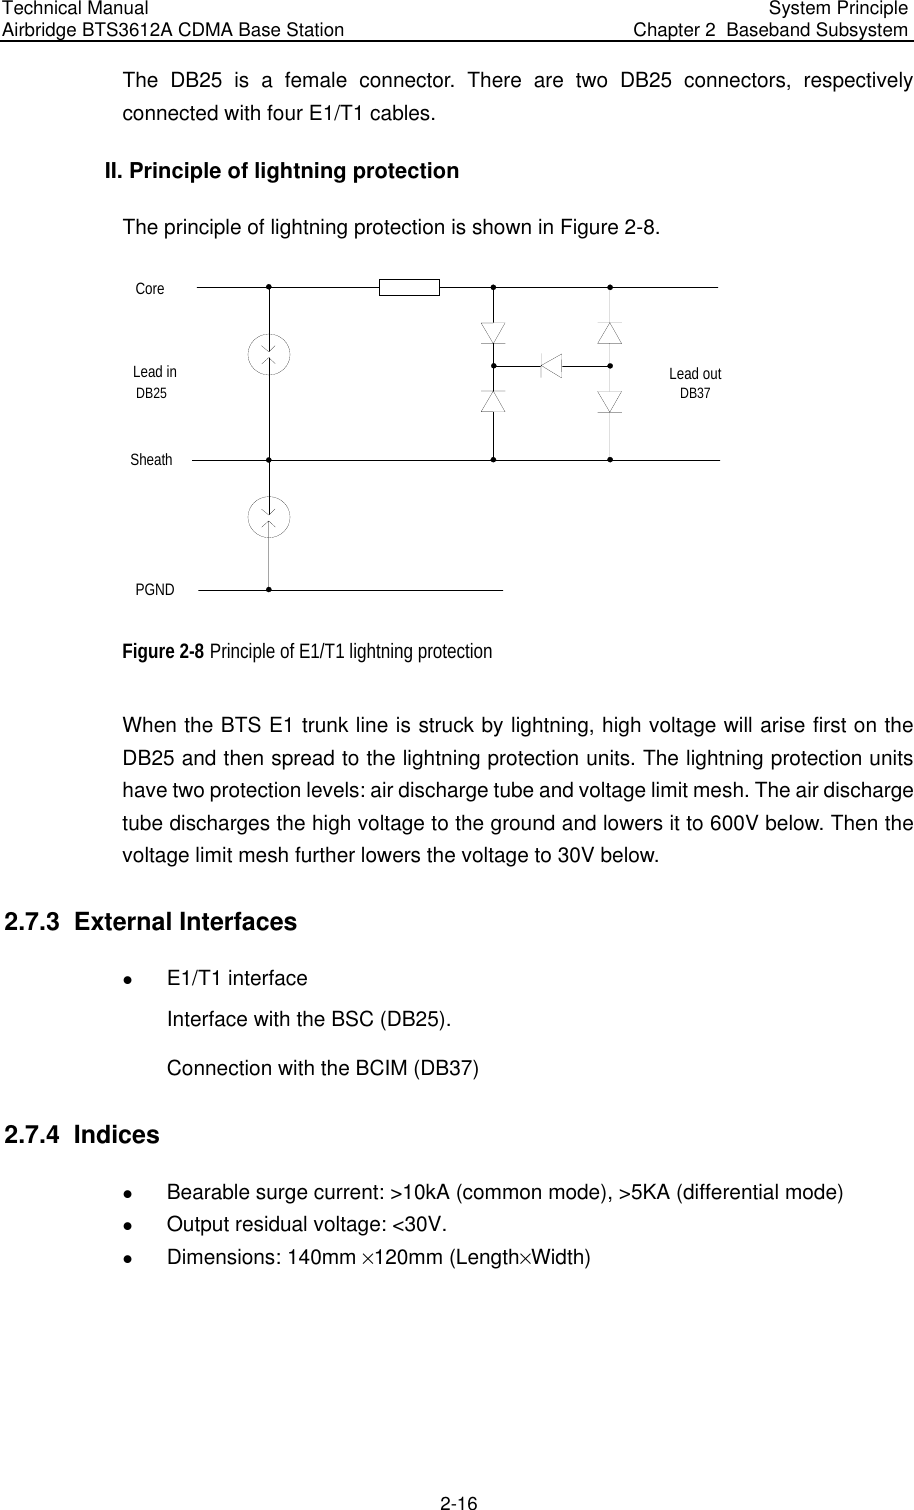 Technical Manual  Airbridge BTS3612A CDMA Base Station  System Principle  Chapter 2  Baseband Subsystem  2-16 The DB25 is a female connector. There are two DB25 connectors, respectively connected with four E1/T1 cables. II. Principle of lightning protection The principle of lightning protection is shown in Figure 2-8.  Core  SheathPGNDLead inDB25Lead outDB37 Figure 2-8 Principle of E1/T1 lightning protection When the BTS E1 trunk line is struck by lightning, high voltage will arise first on the DB25 and then spread to the lightning protection units. The lightning protection units have two protection levels: air discharge tube and voltage limit mesh. The air discharge tube discharges the high voltage to the ground and lowers it to 600V below. Then the voltage limit mesh further lowers the voltage to 30V below.  2.7.3  External Interfaces z E1/T1 interface Interface with the BSC (DB25). Connection with the BCIM (DB37) 2.7.4  Indices z Bearable surge current: &gt;10kA (common mode), &gt;5KA (differential mode) z Output residual voltage: &lt;30V.  z Dimensions: 140mm %120mm (Length%Width) 